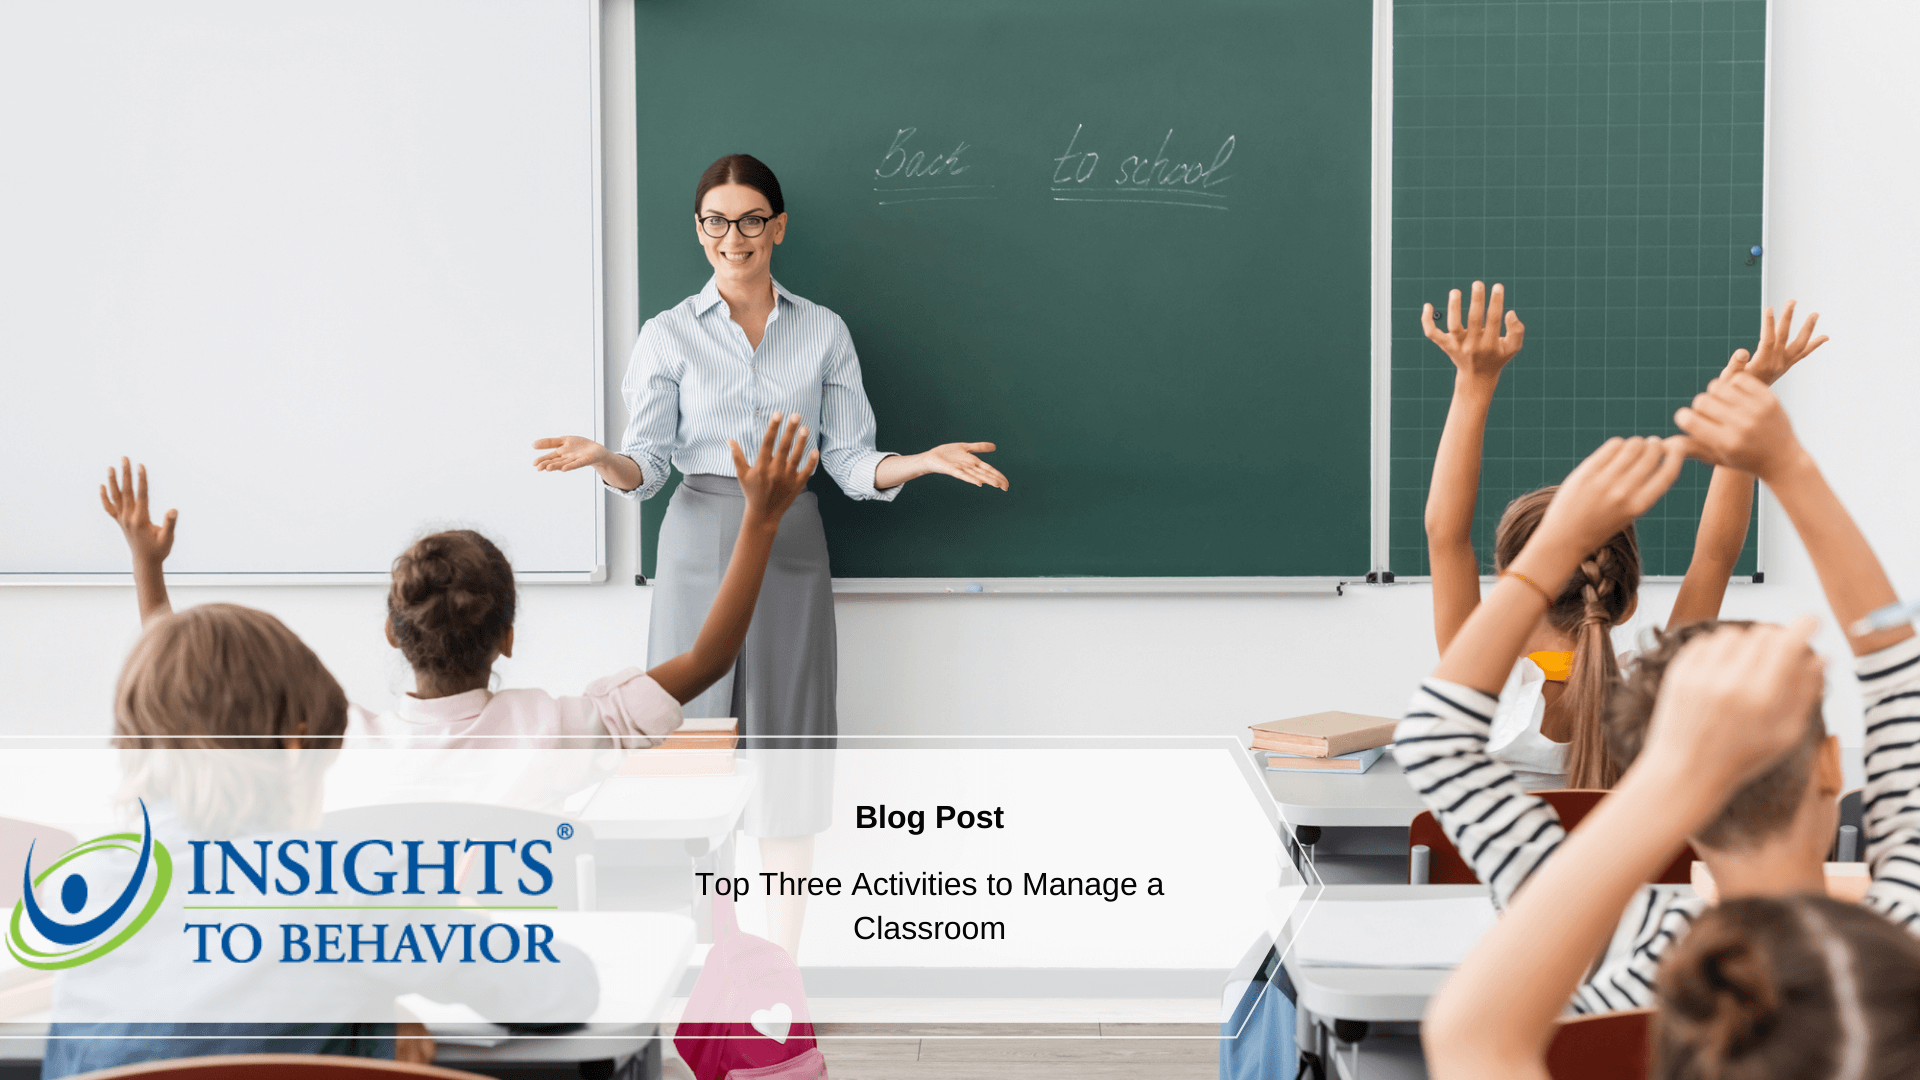 Top 3 Activities to Manage a Classroom